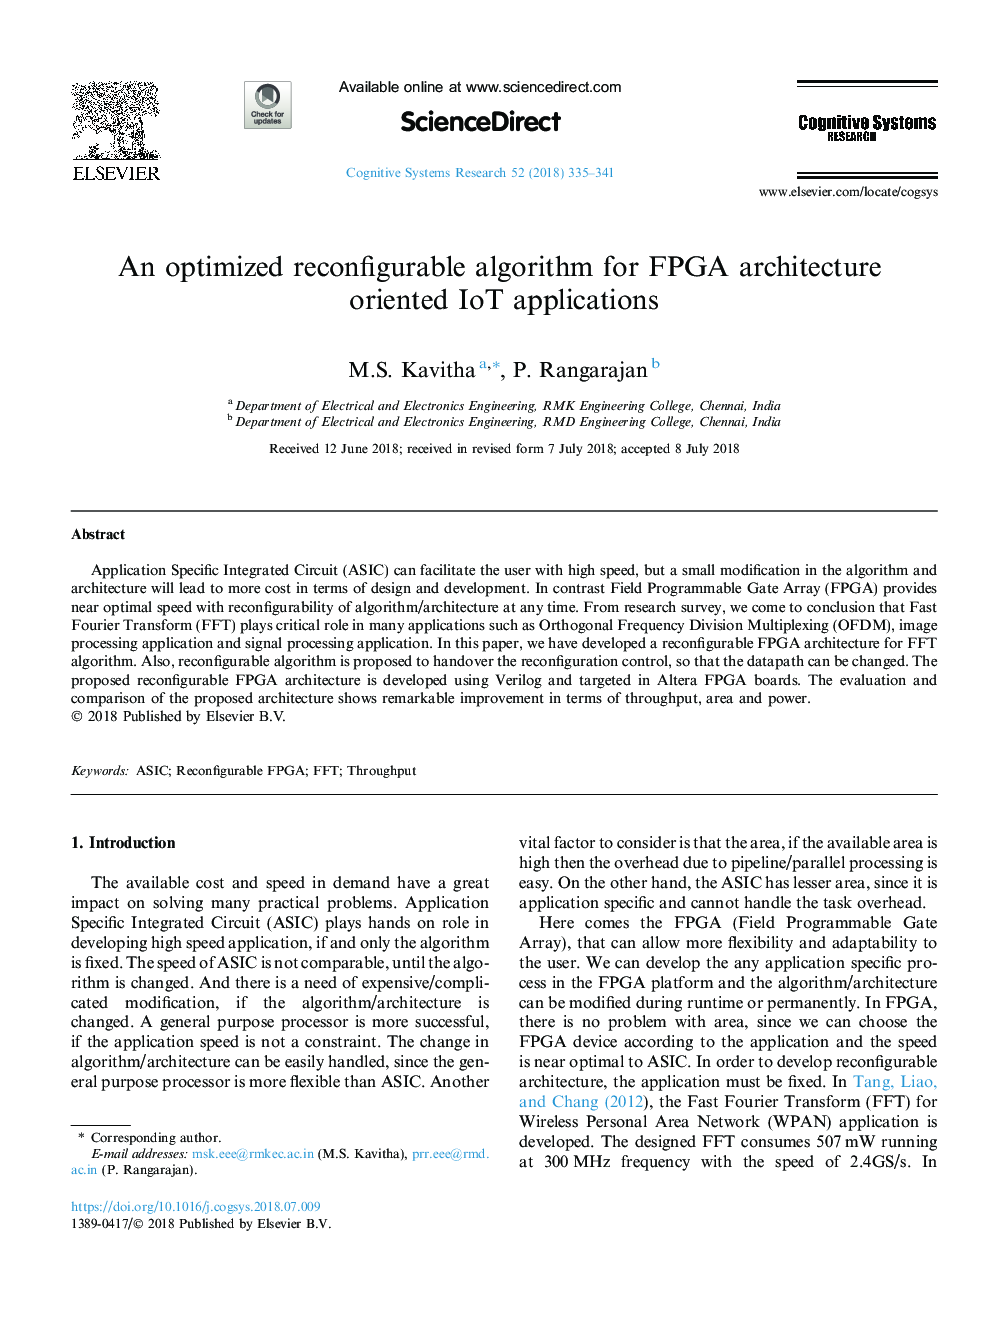 An optimized reconfigurable algorithm for FPGA architecture oriented IoT applications